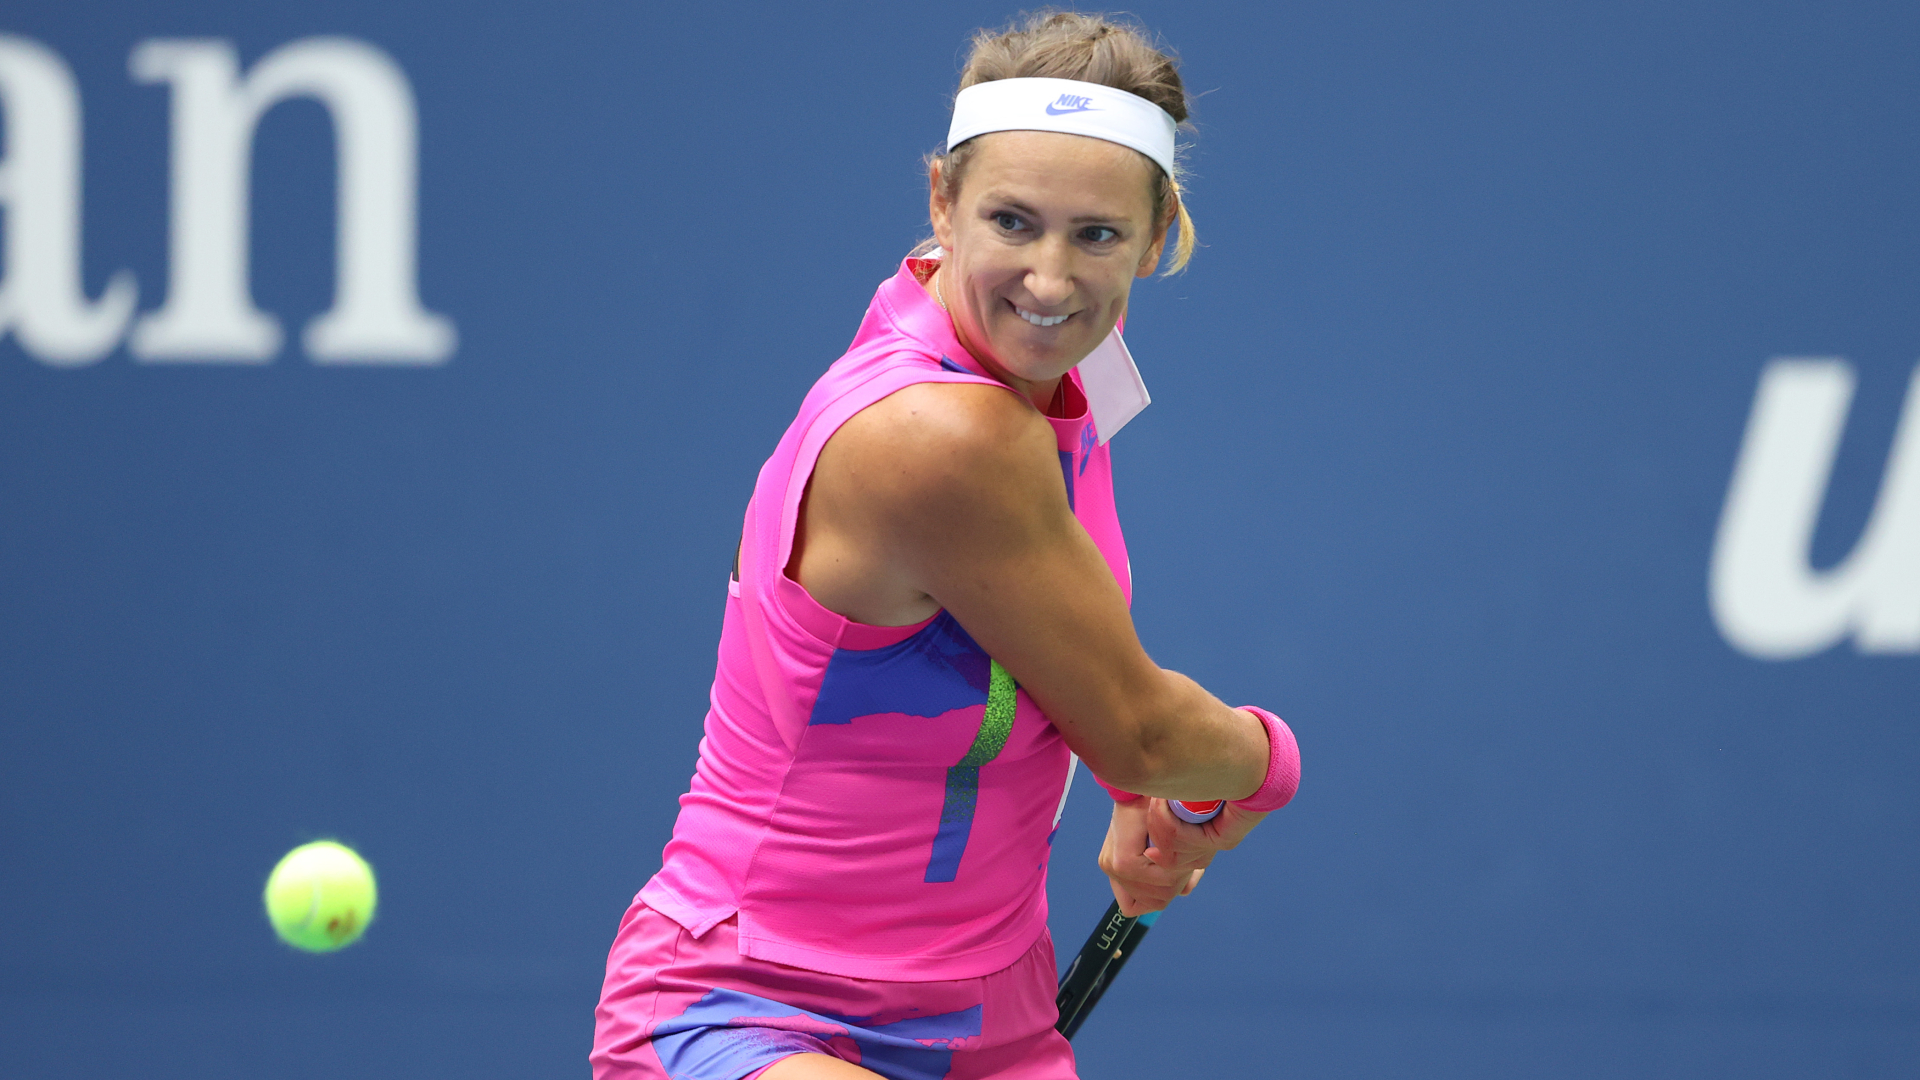 Two-time Australian Open champion Victoria Azarenka pleaded for players to be more understanding.